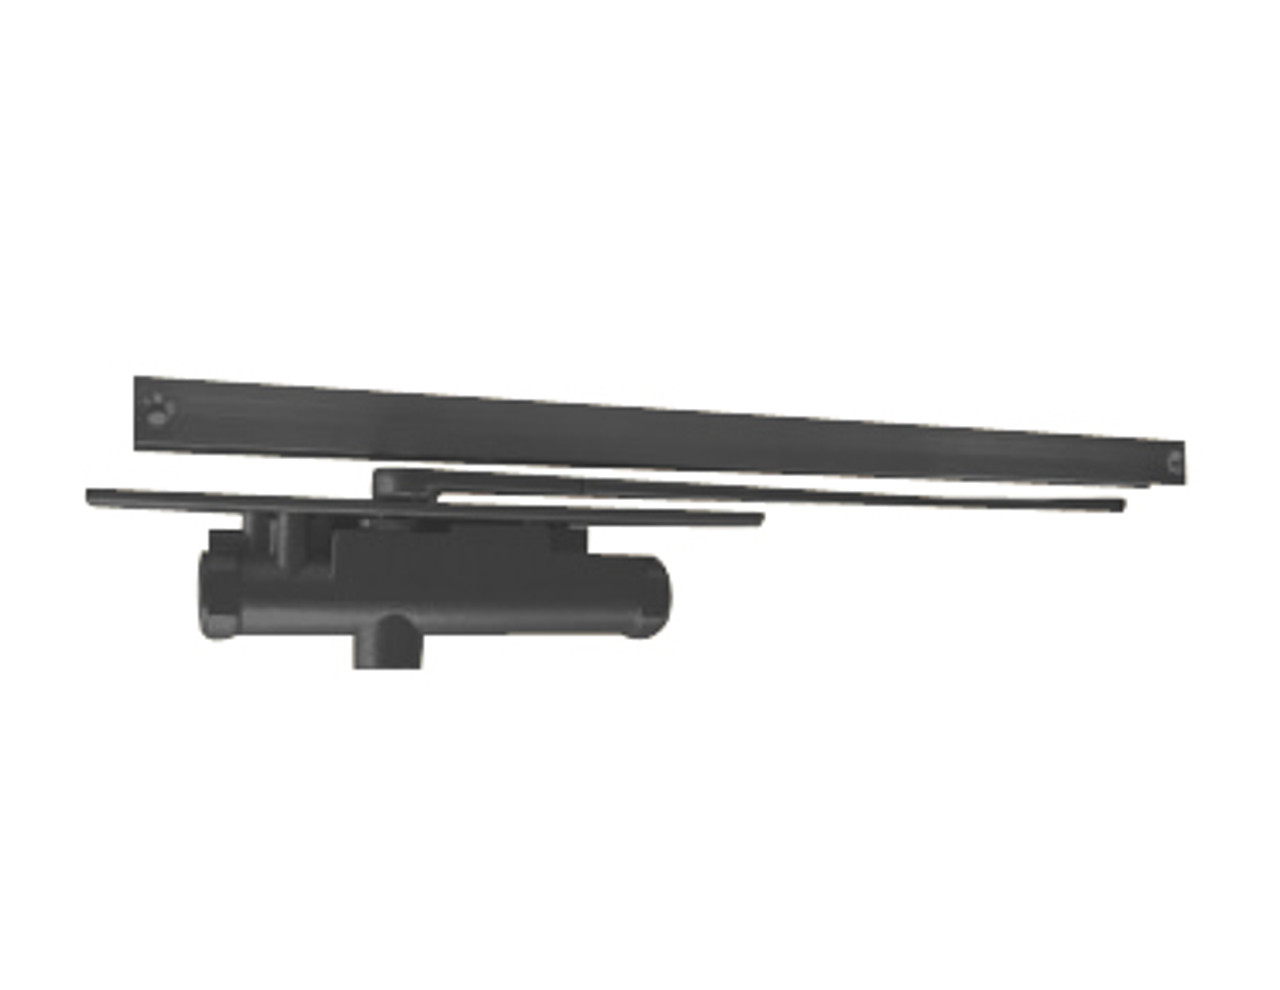 3033-H-LH-BLACK LCN Door Closer with Hold Open Arm in Black Finish